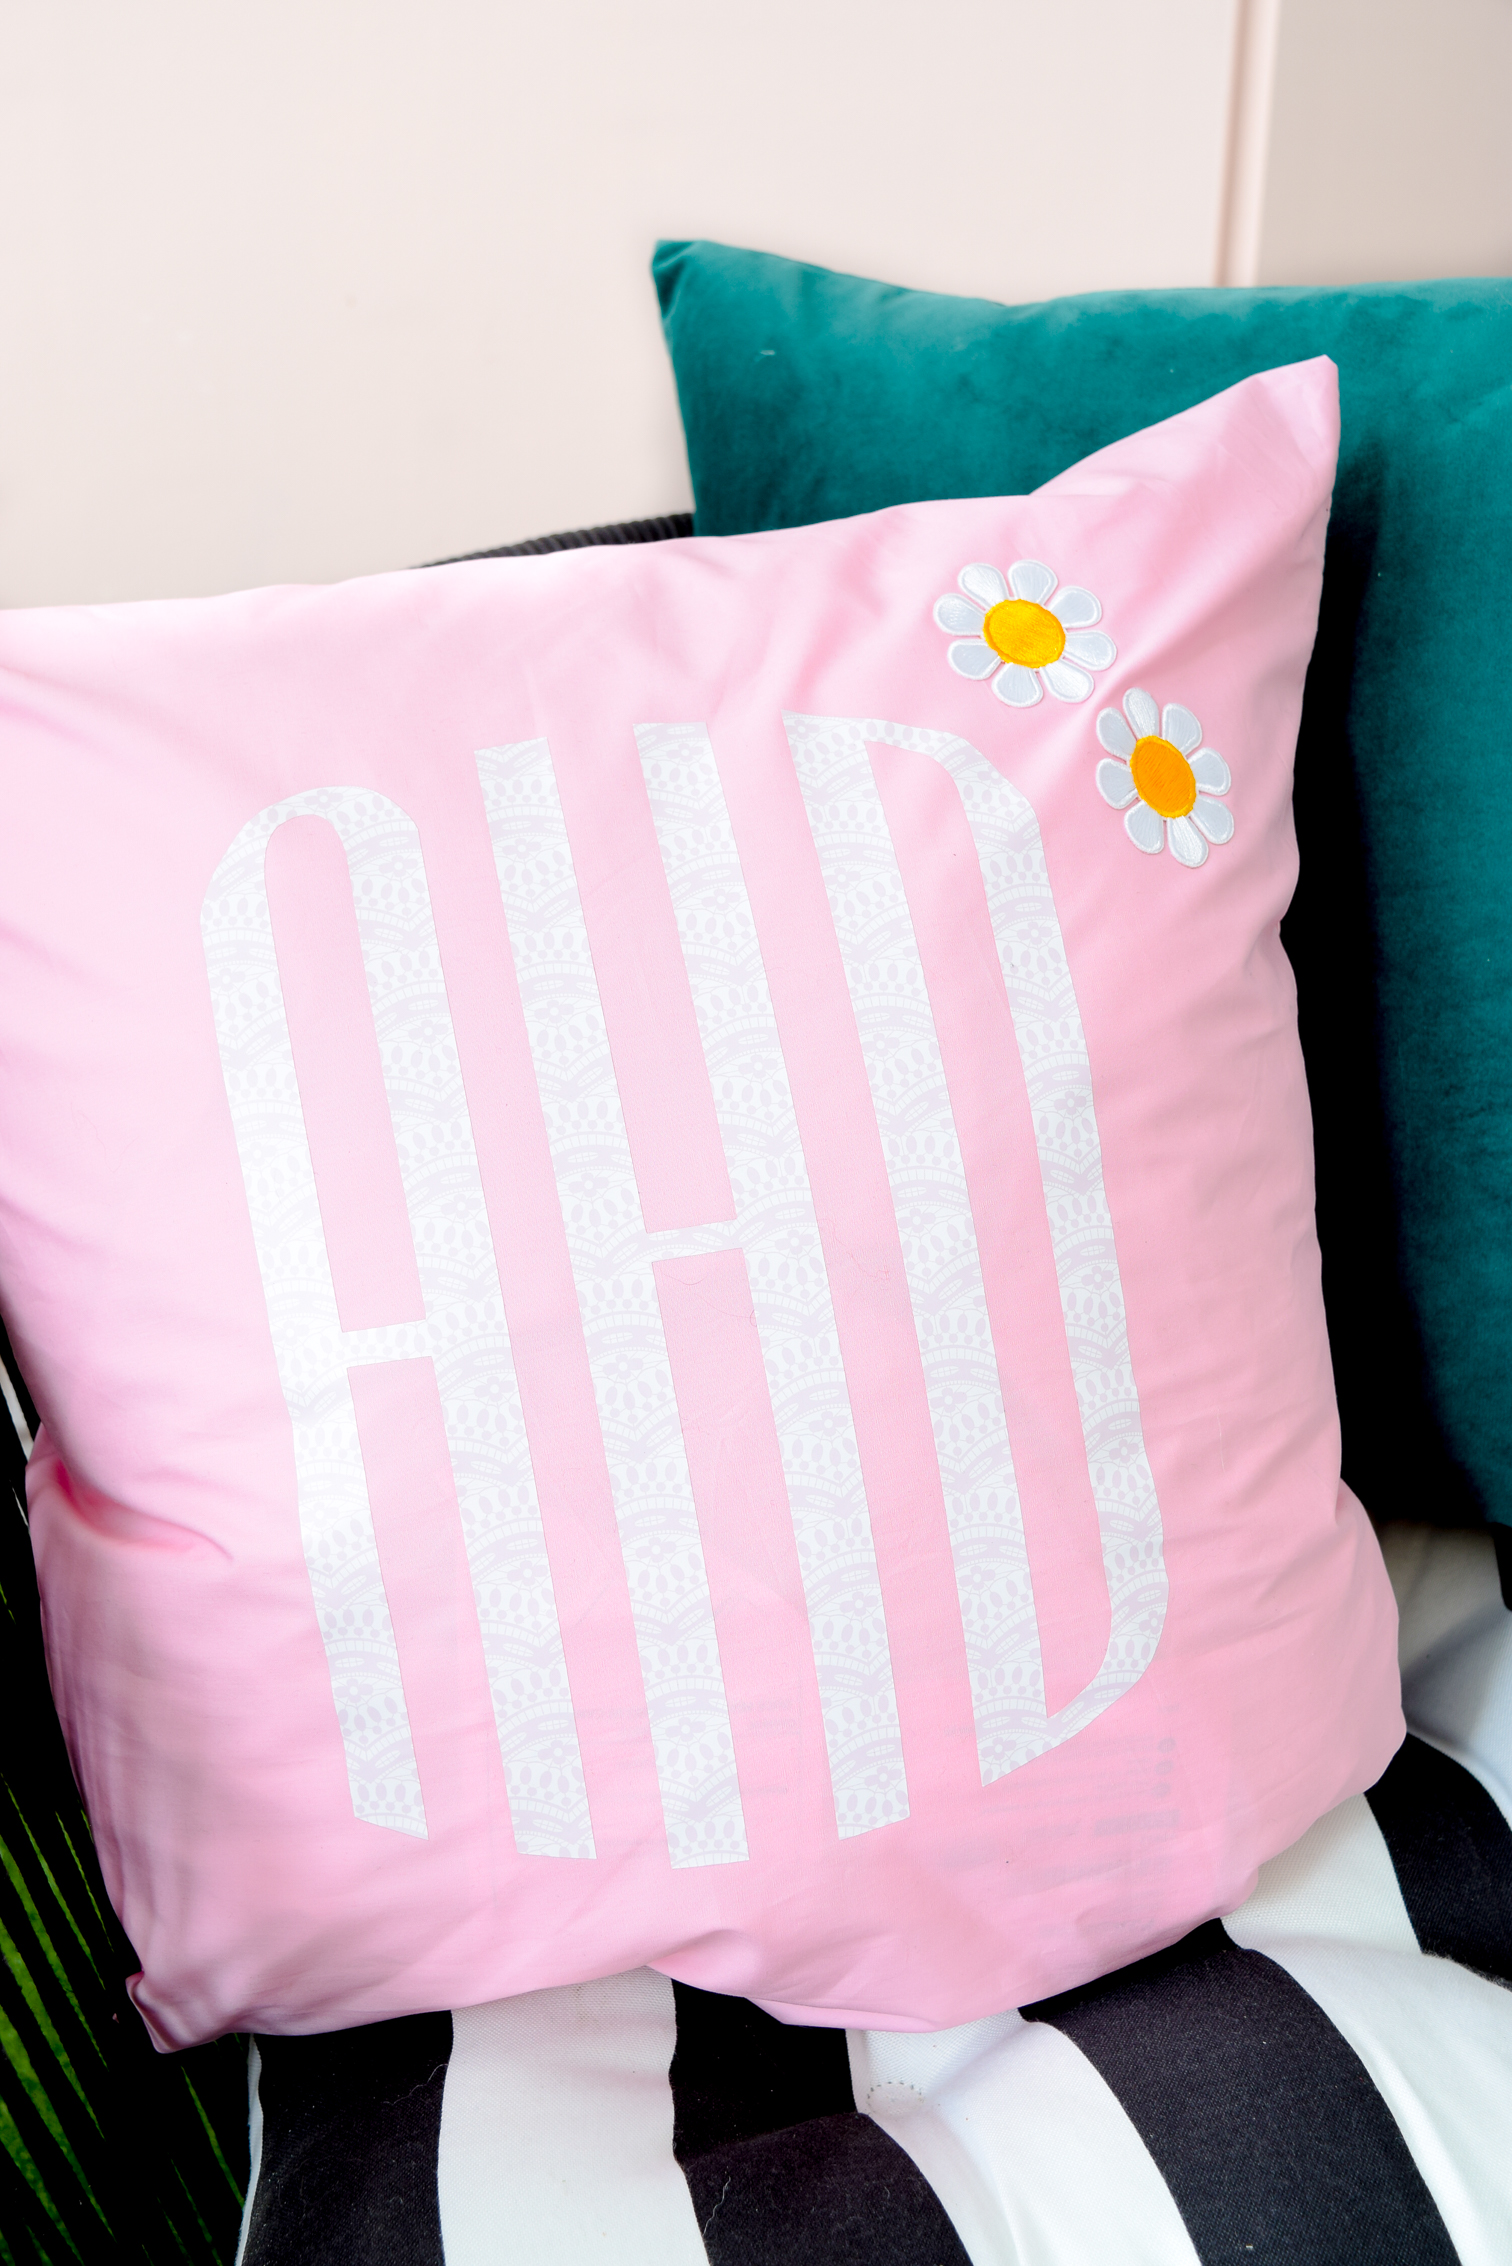 Patterned Iron on Monogram Pillows are where it is at this season. Get your hands on Cricut's new pattern samplers, and create some funky, retro cool pillows for your home now.